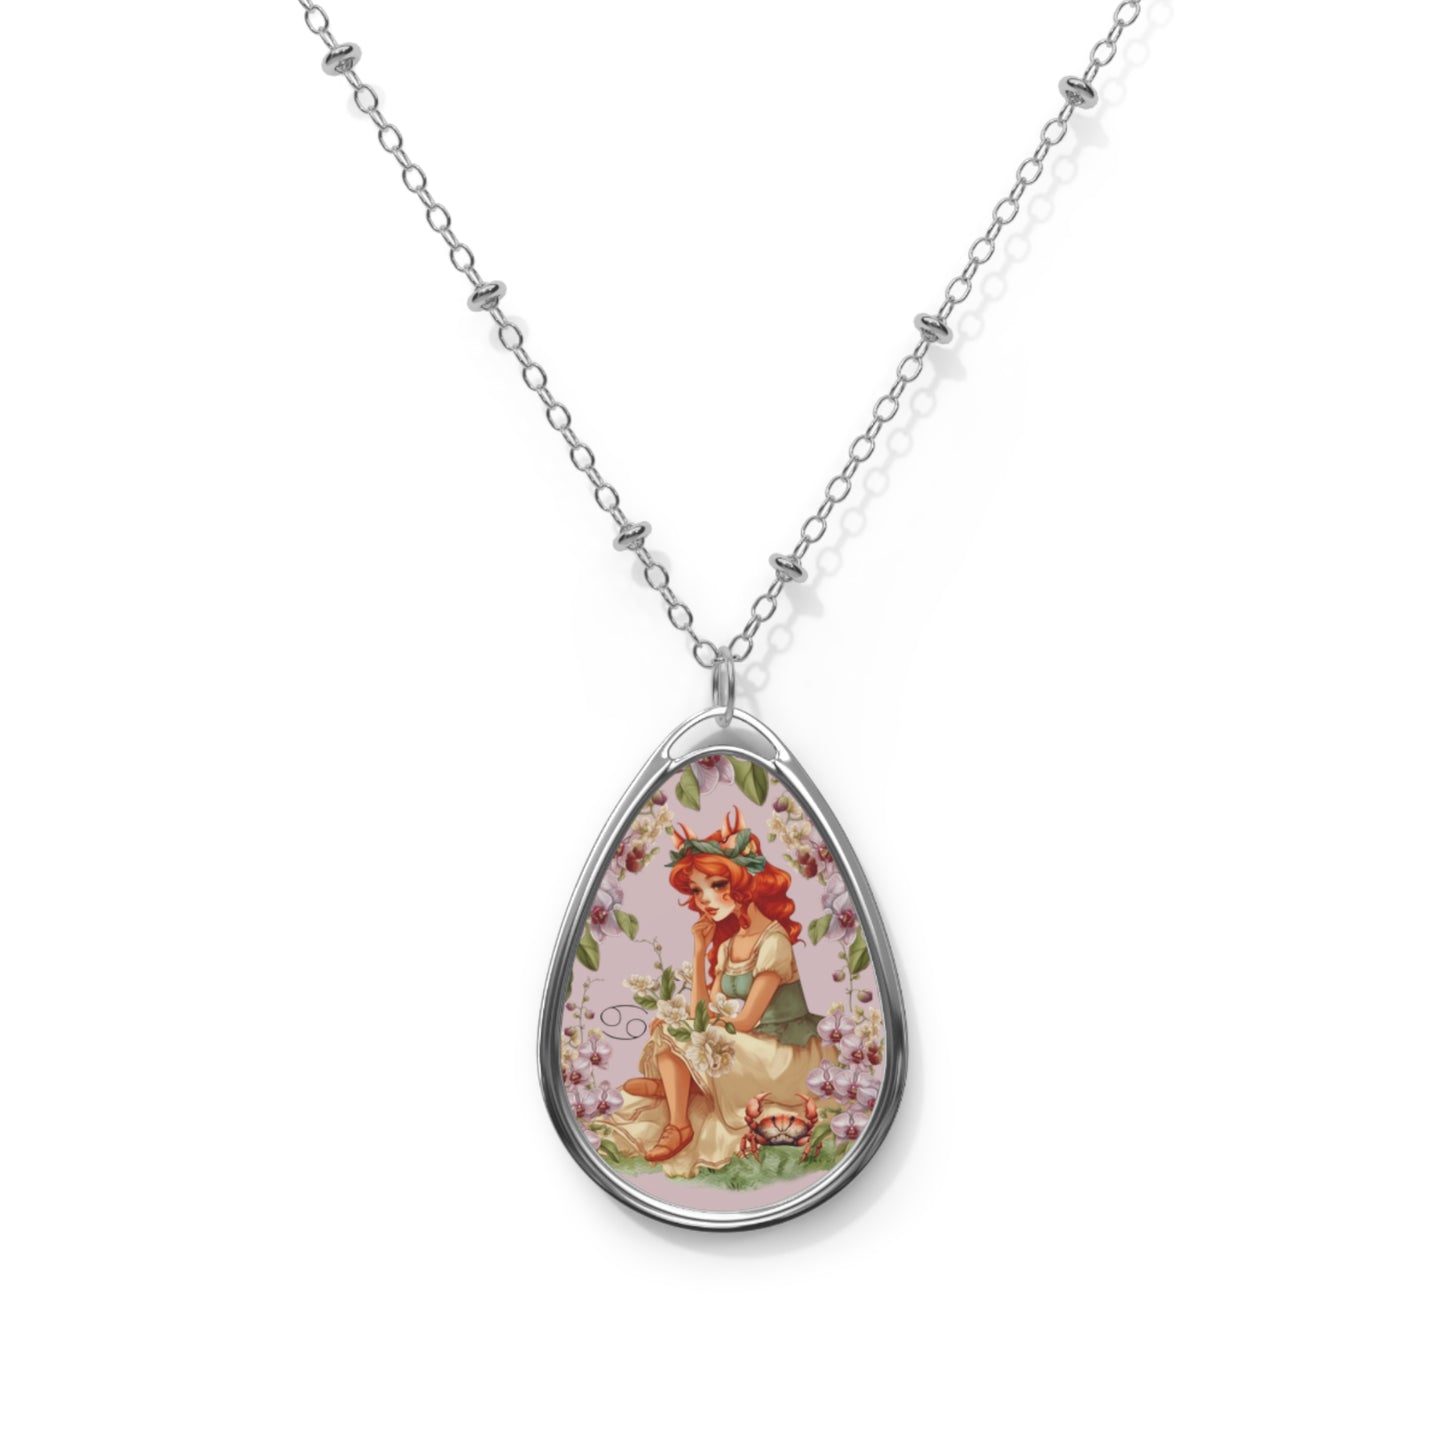 Cancer Zodiac Sign ~ Girl and Crab Vintage Illustration ~ Necklace & Oval Pendant With Chain